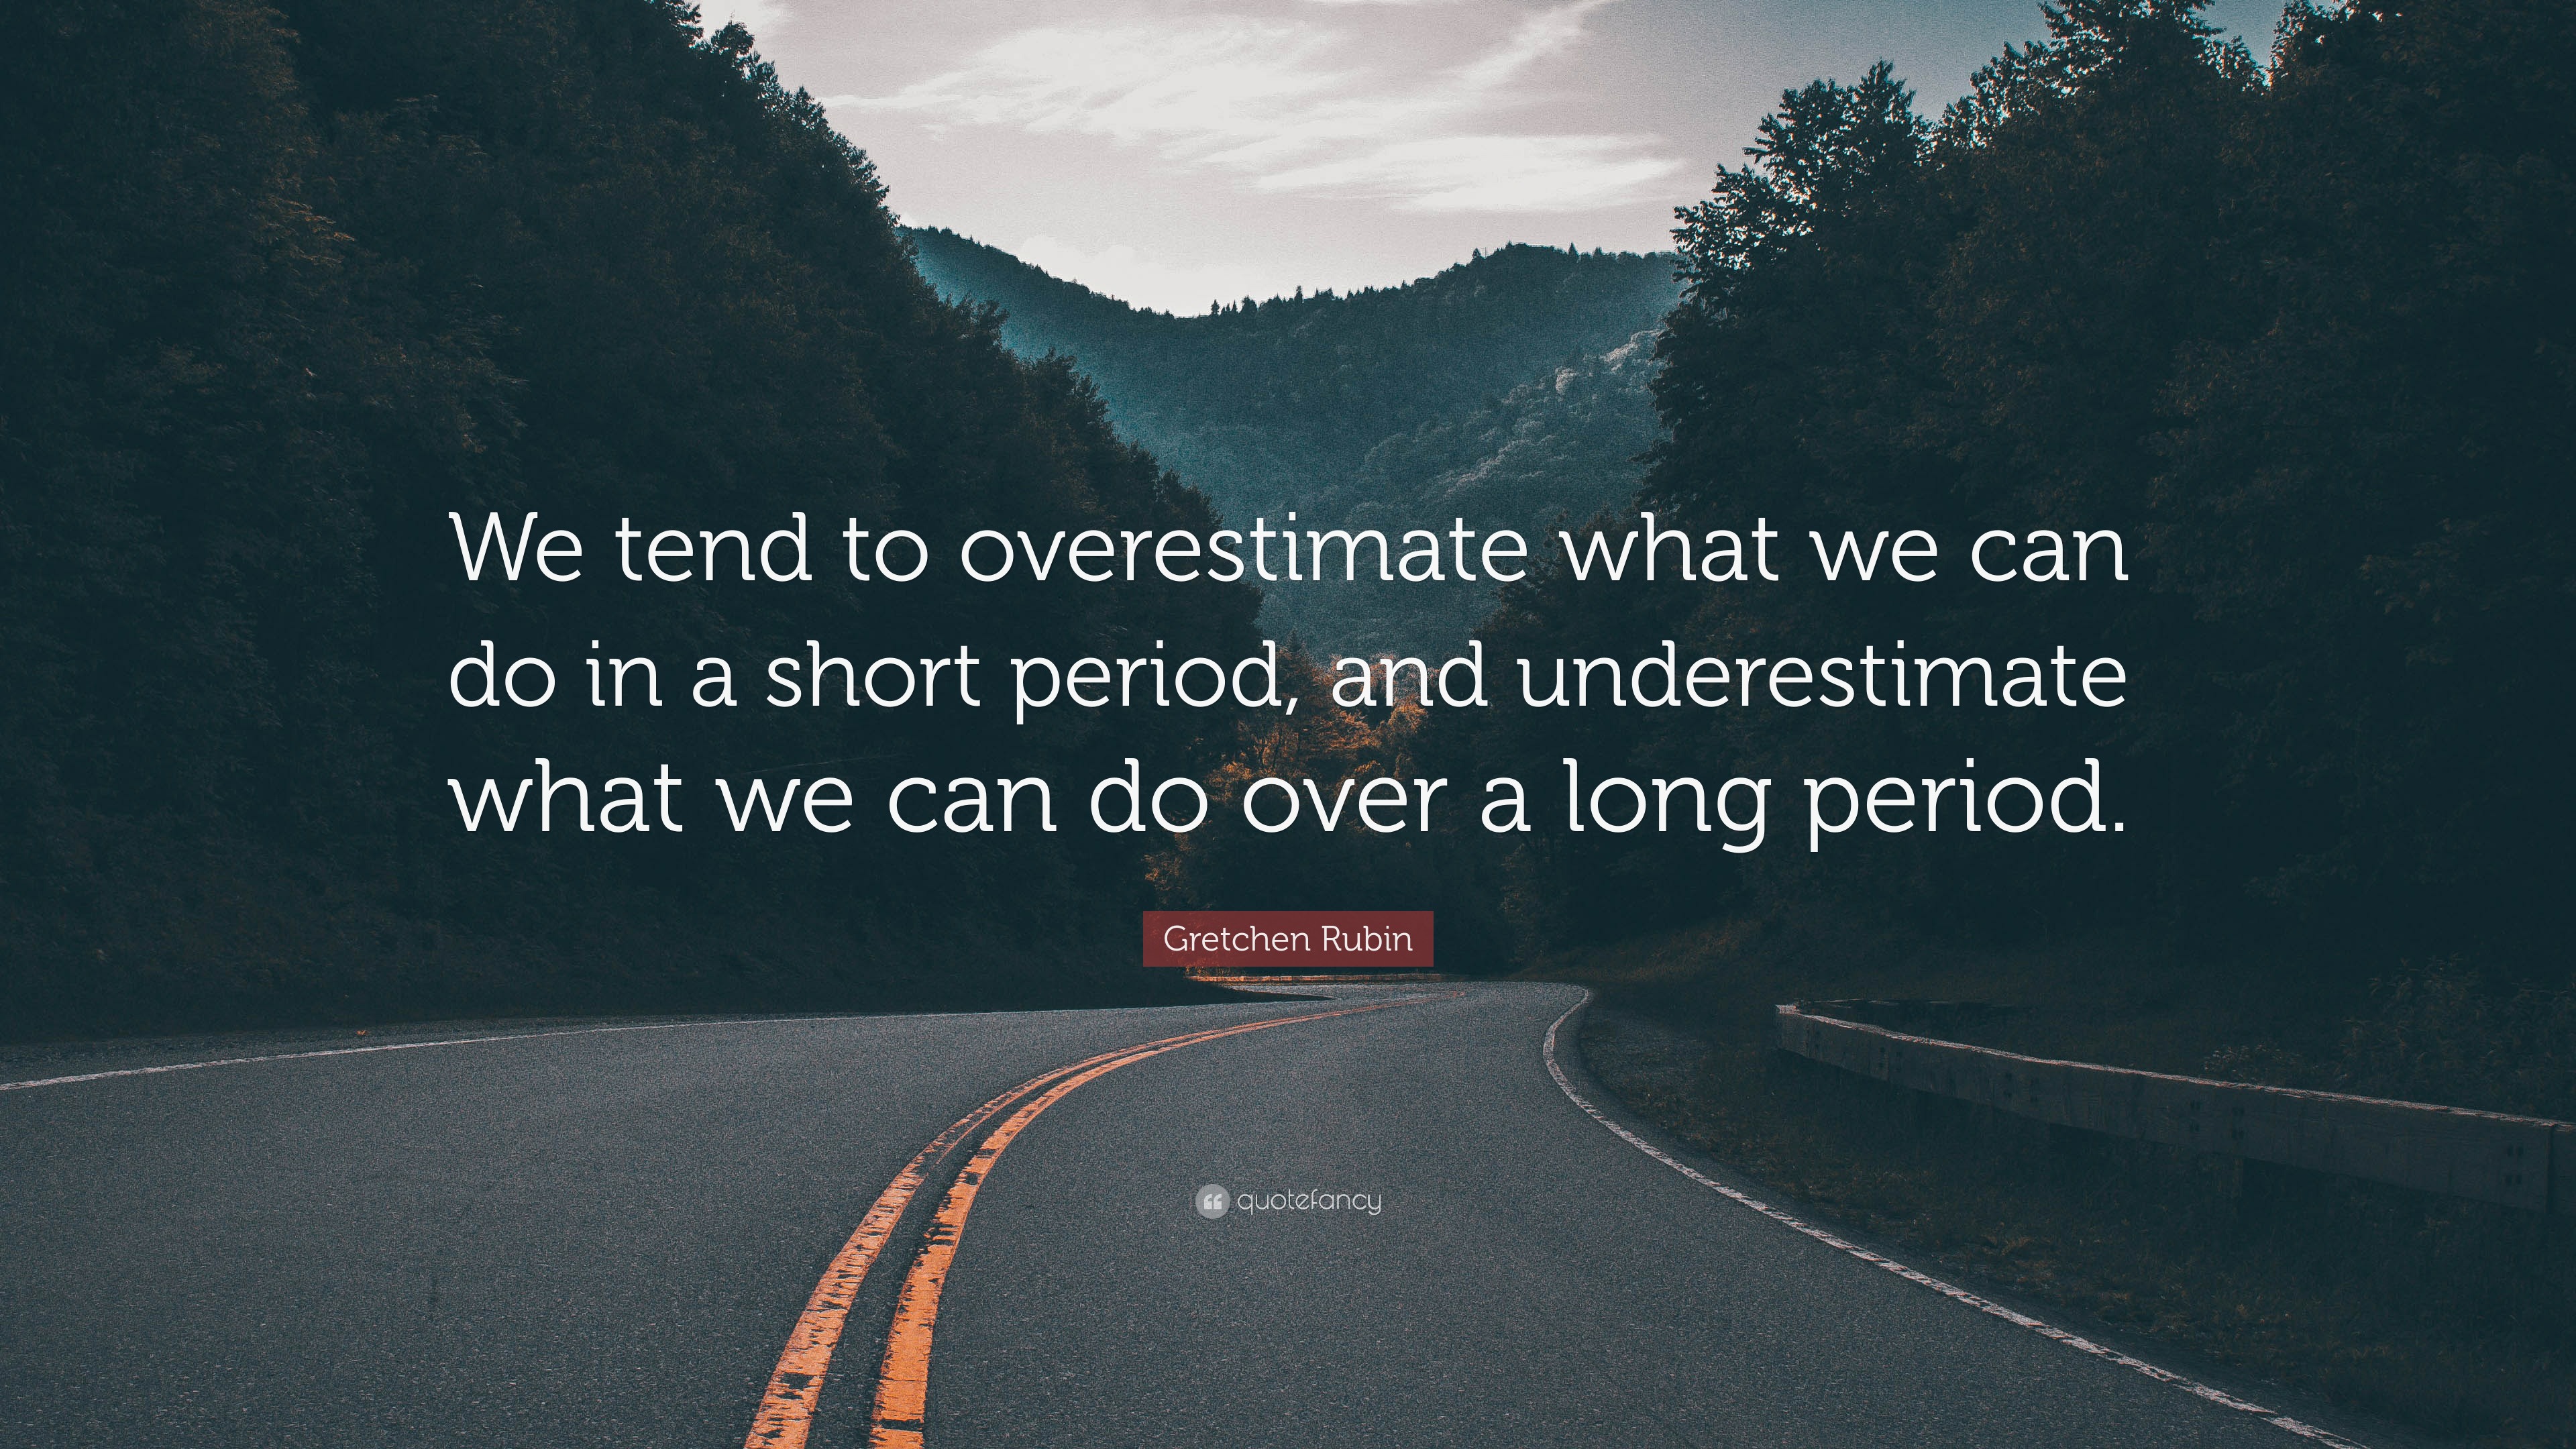 We tend to overestimate what we can do in a short period, and underestimate...